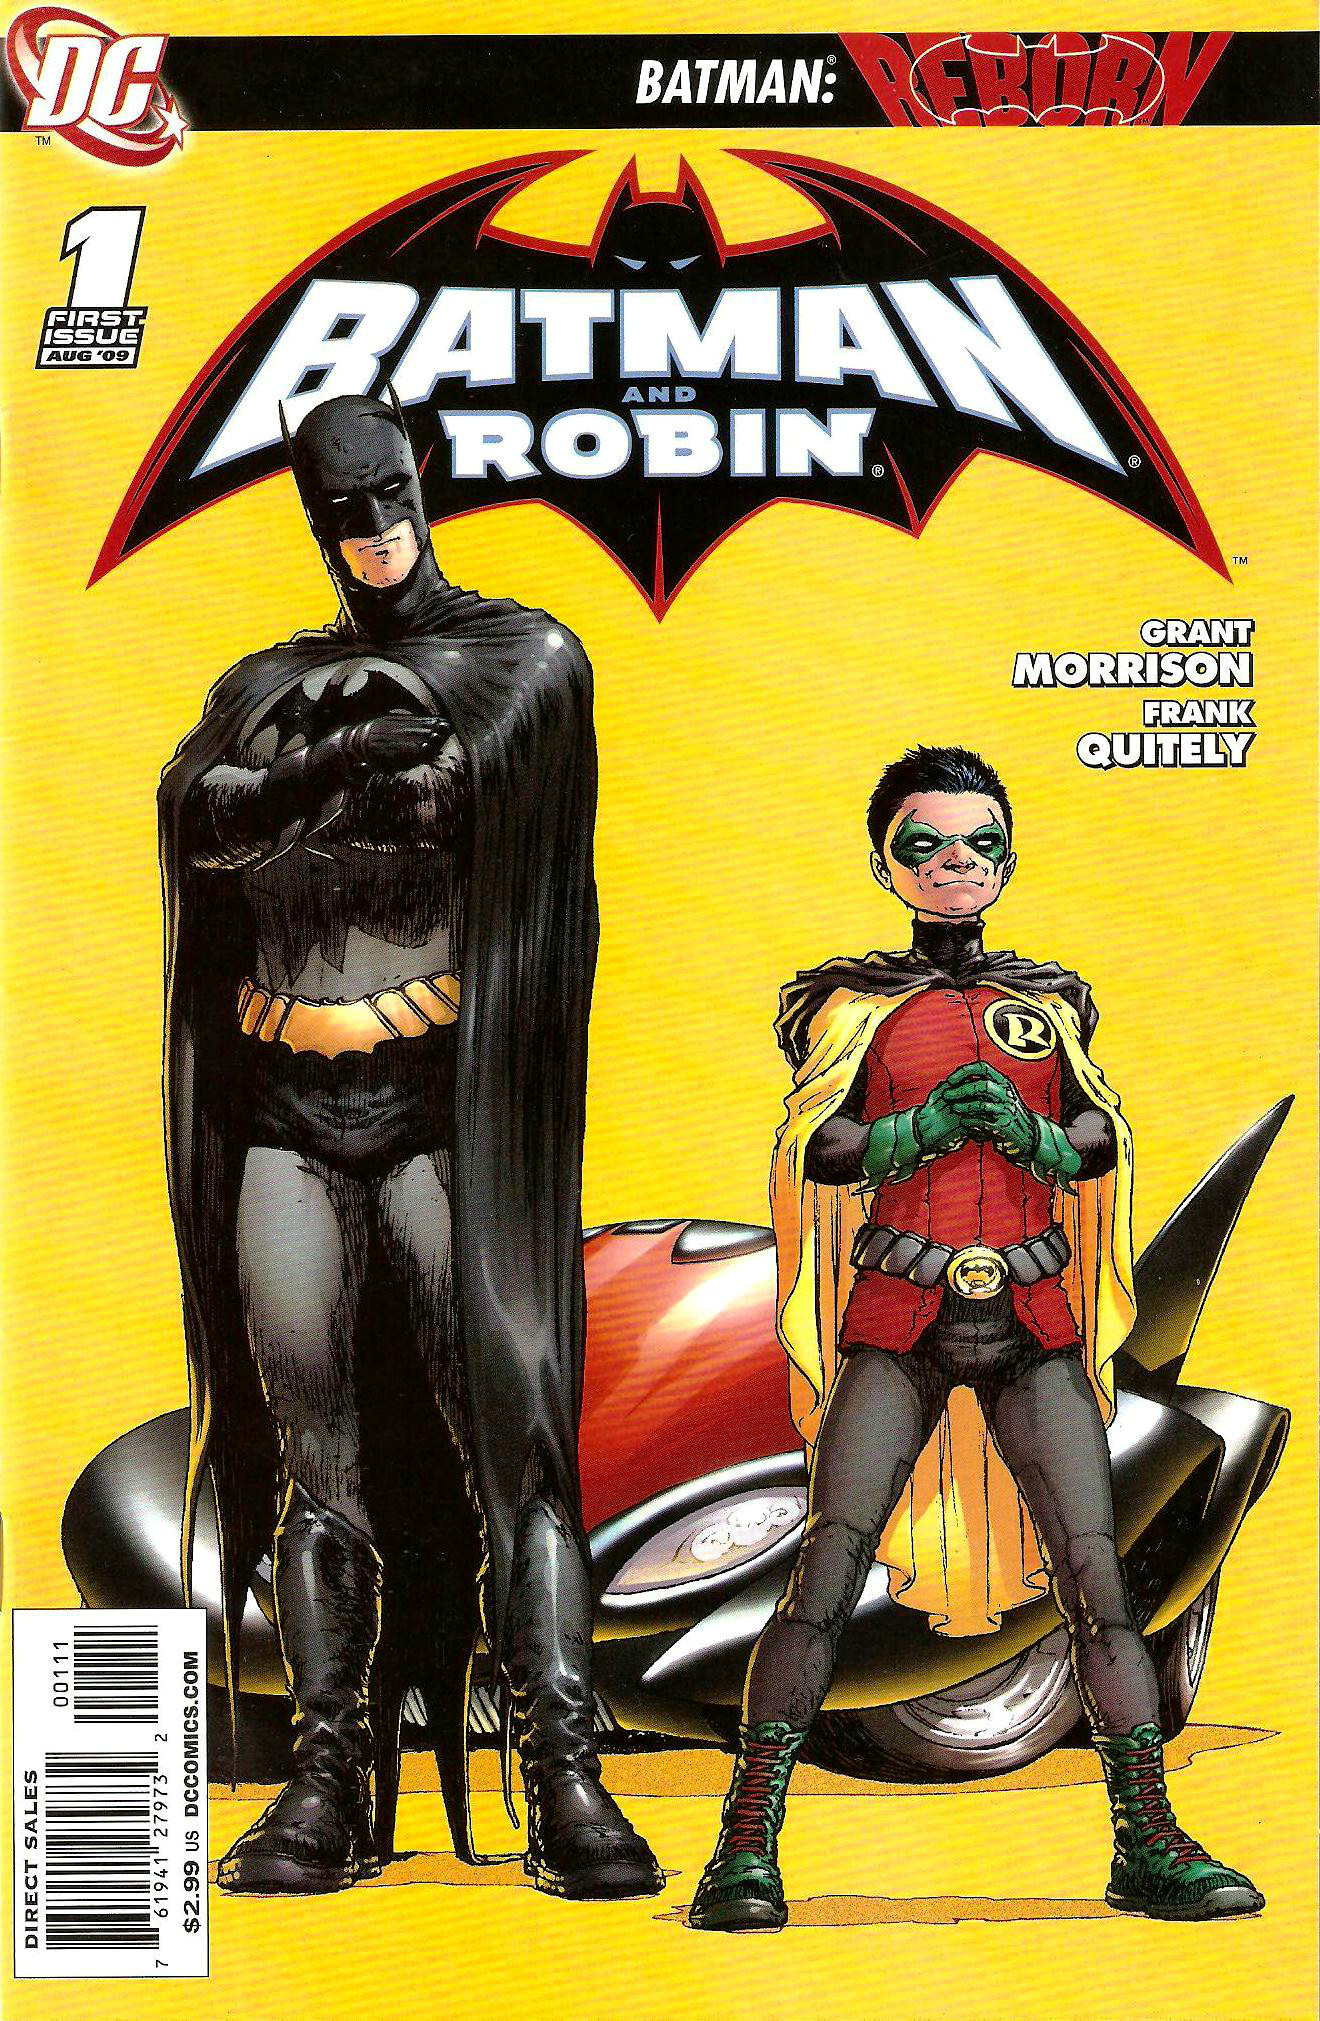 From Batman and Robin (Vol. 1) #1 (2009) Cover